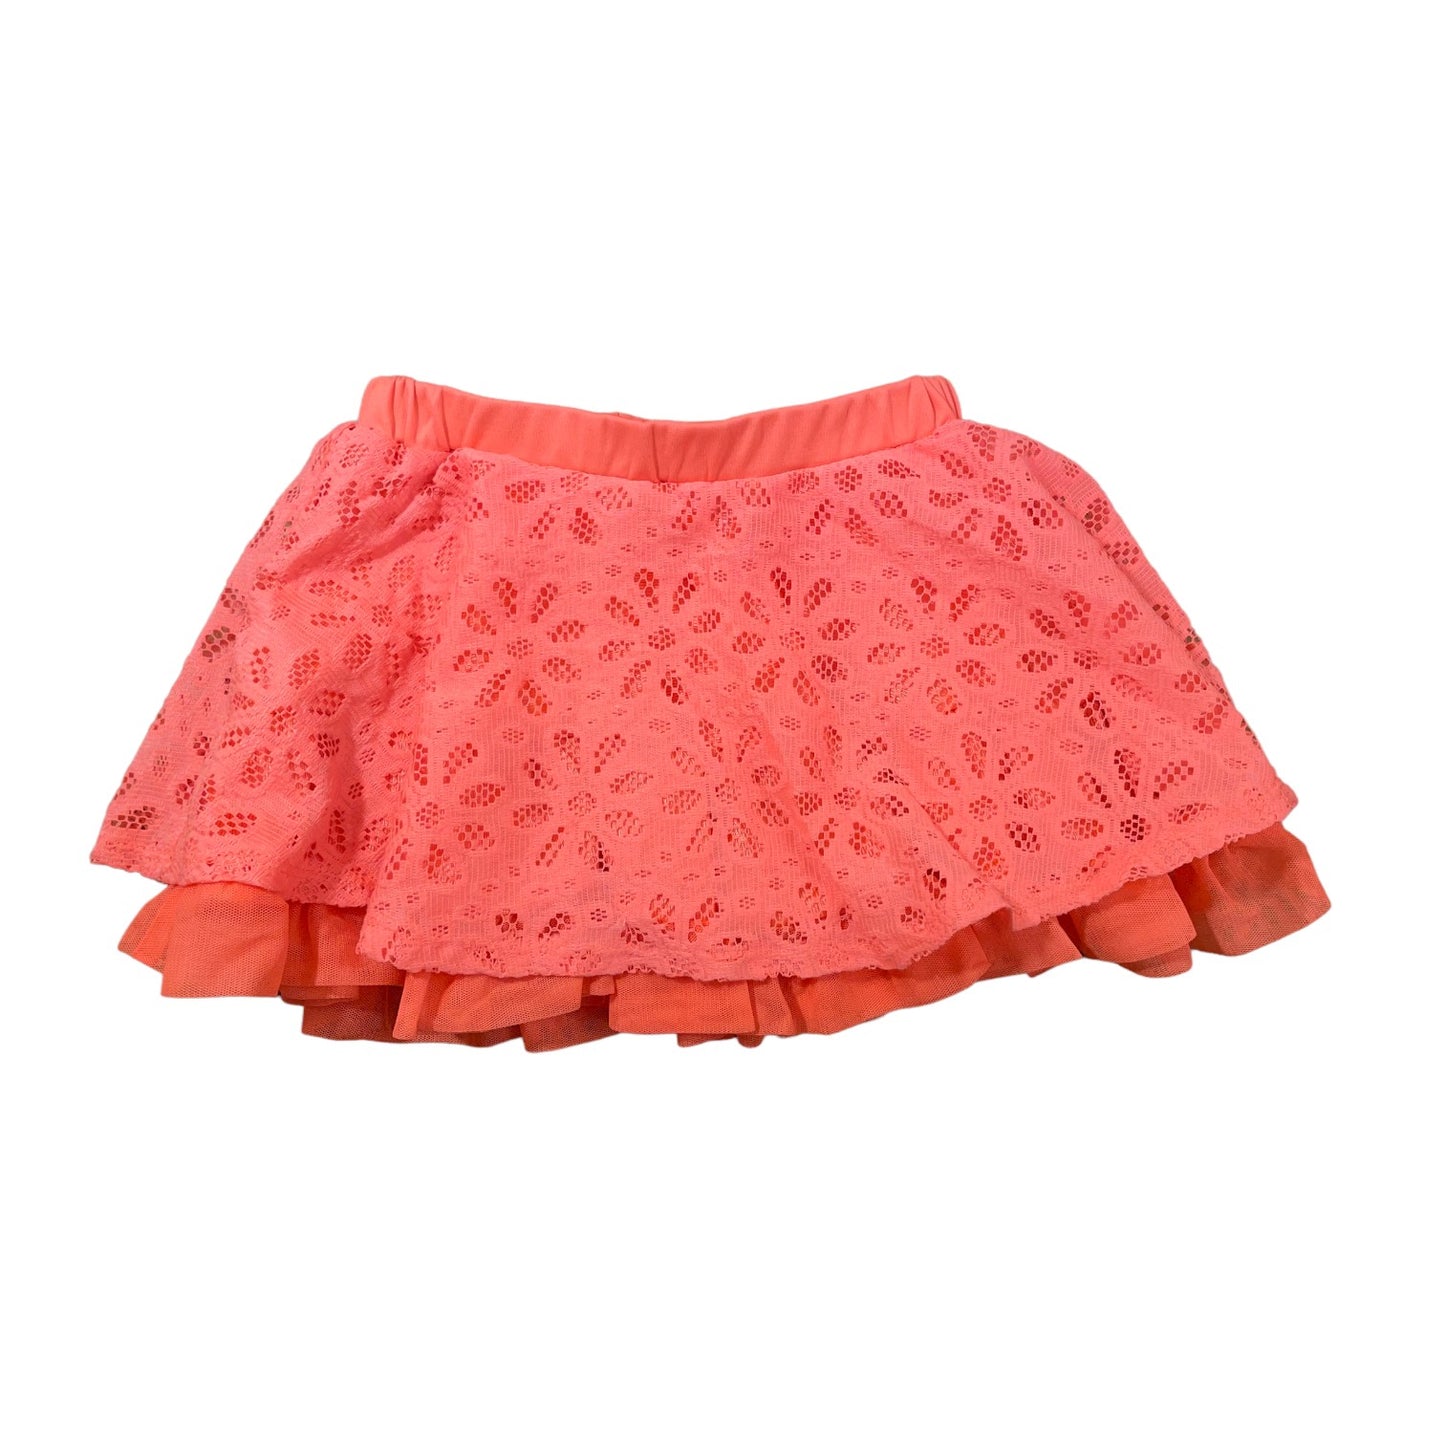 Disney Girls Skirt Coral with Lace